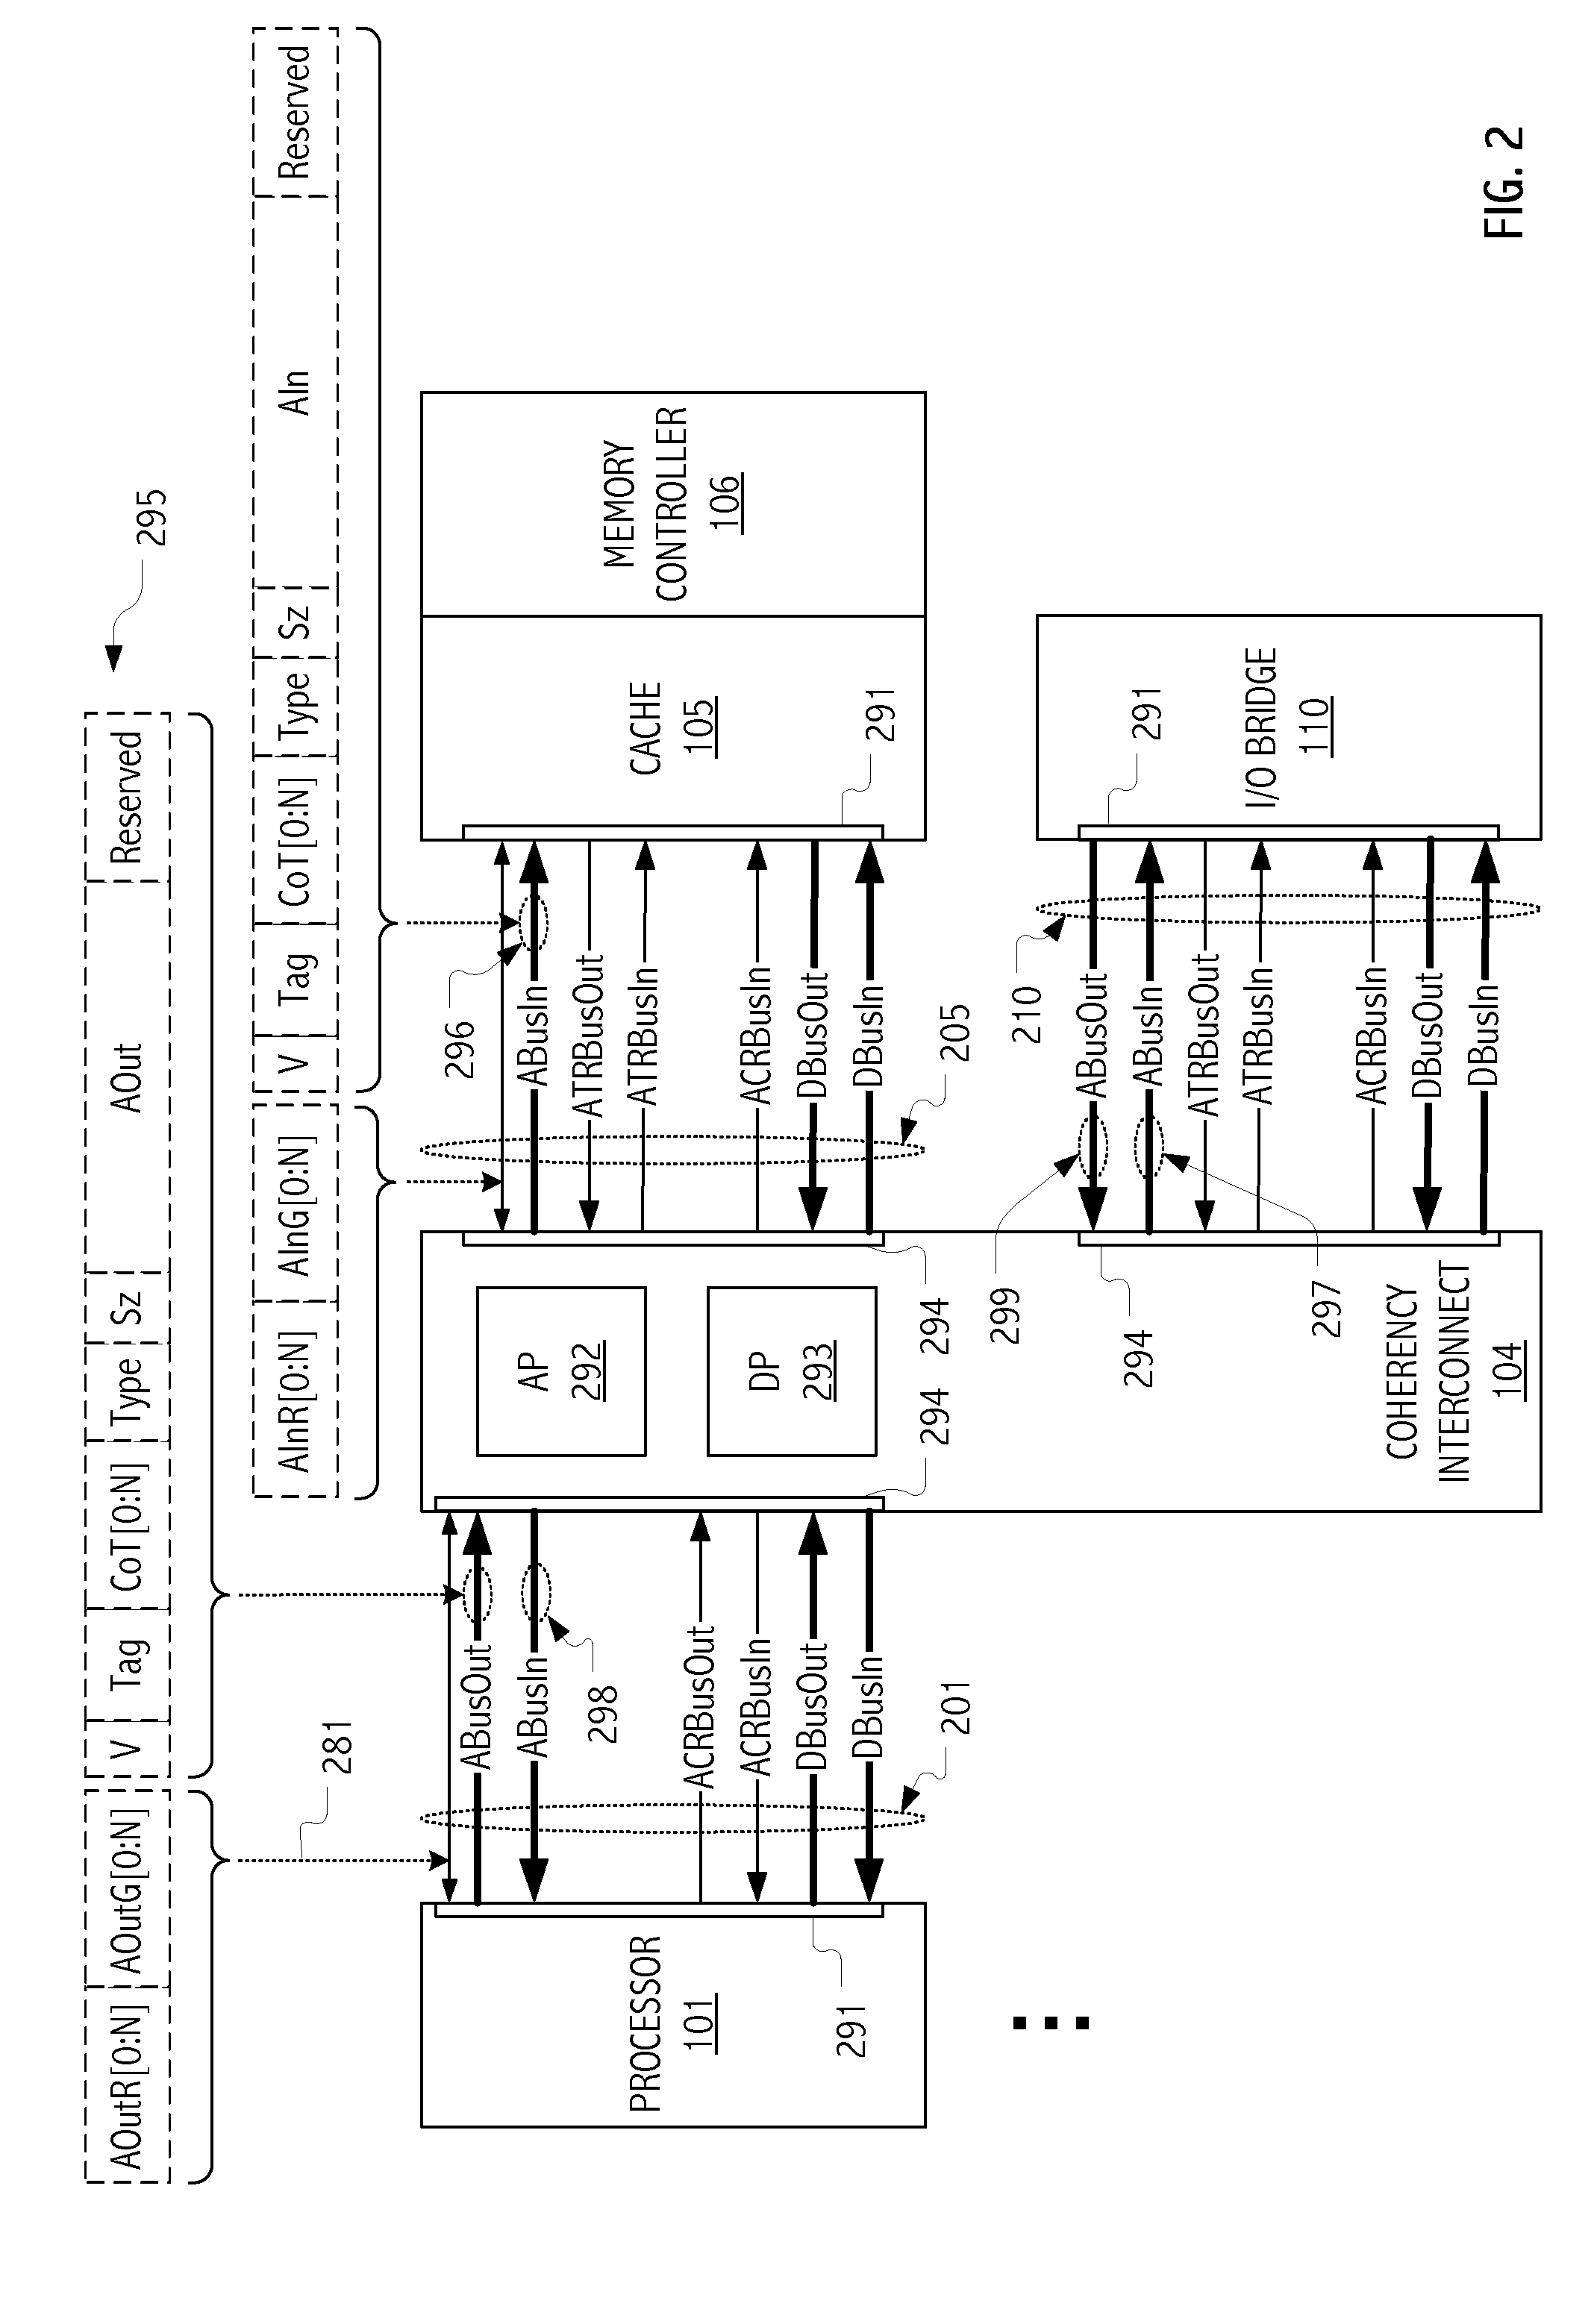 Flow Control Mechanisms for Avoidance of Retries and/or Deadlocks in an Interconnect